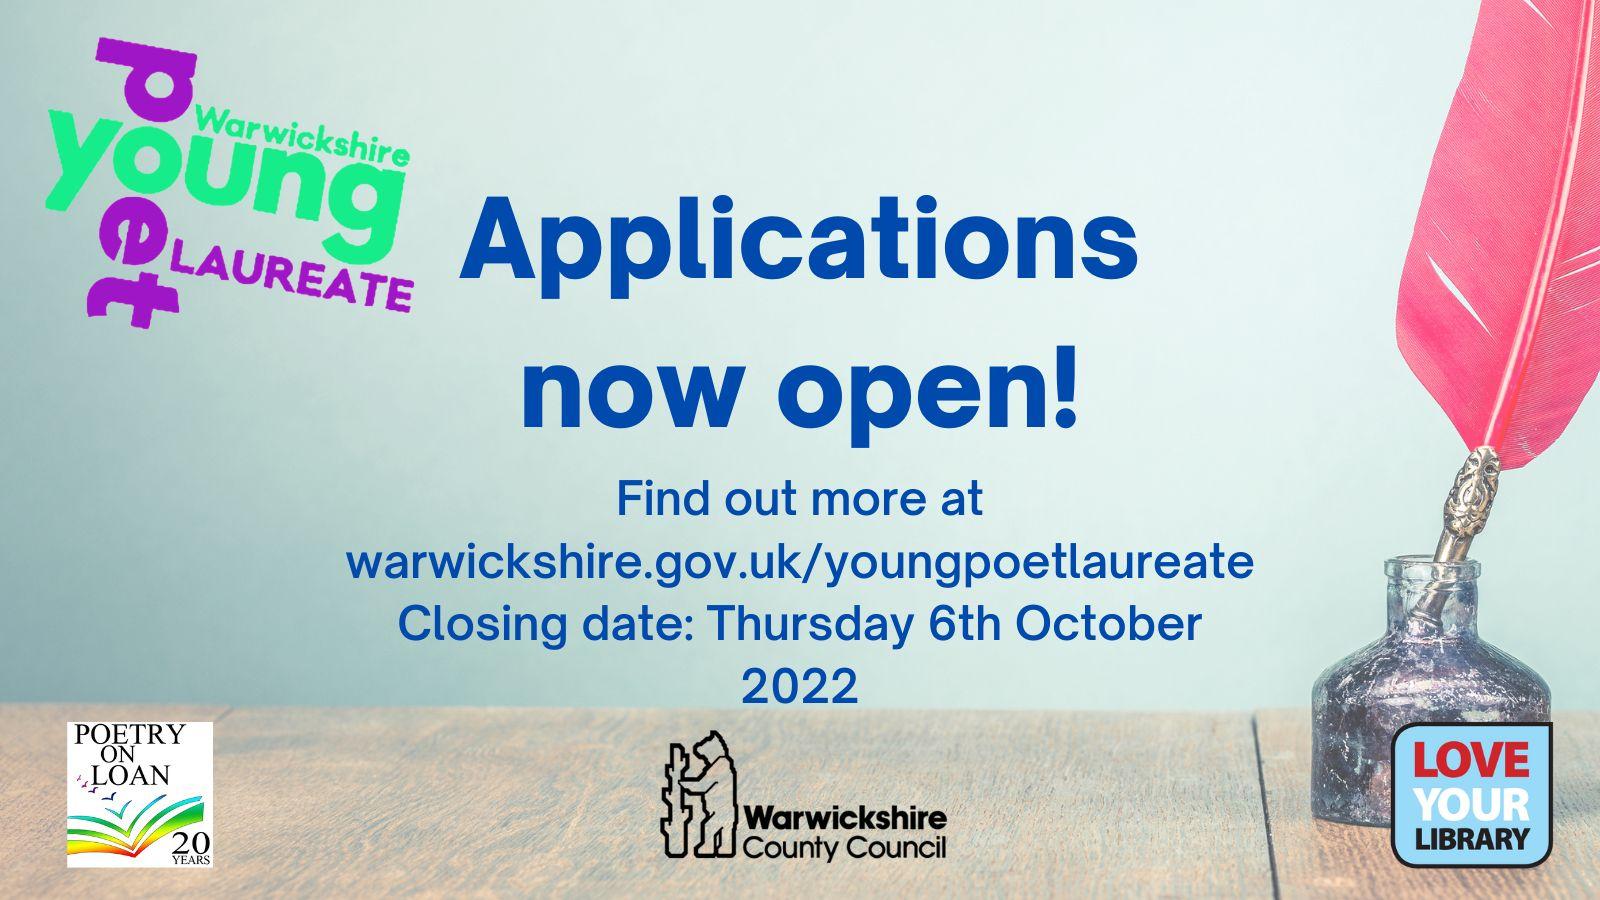 Applications now open, closing 06/10/2022, find out more at warwickshire.gov.uk/youngpoetlaureate